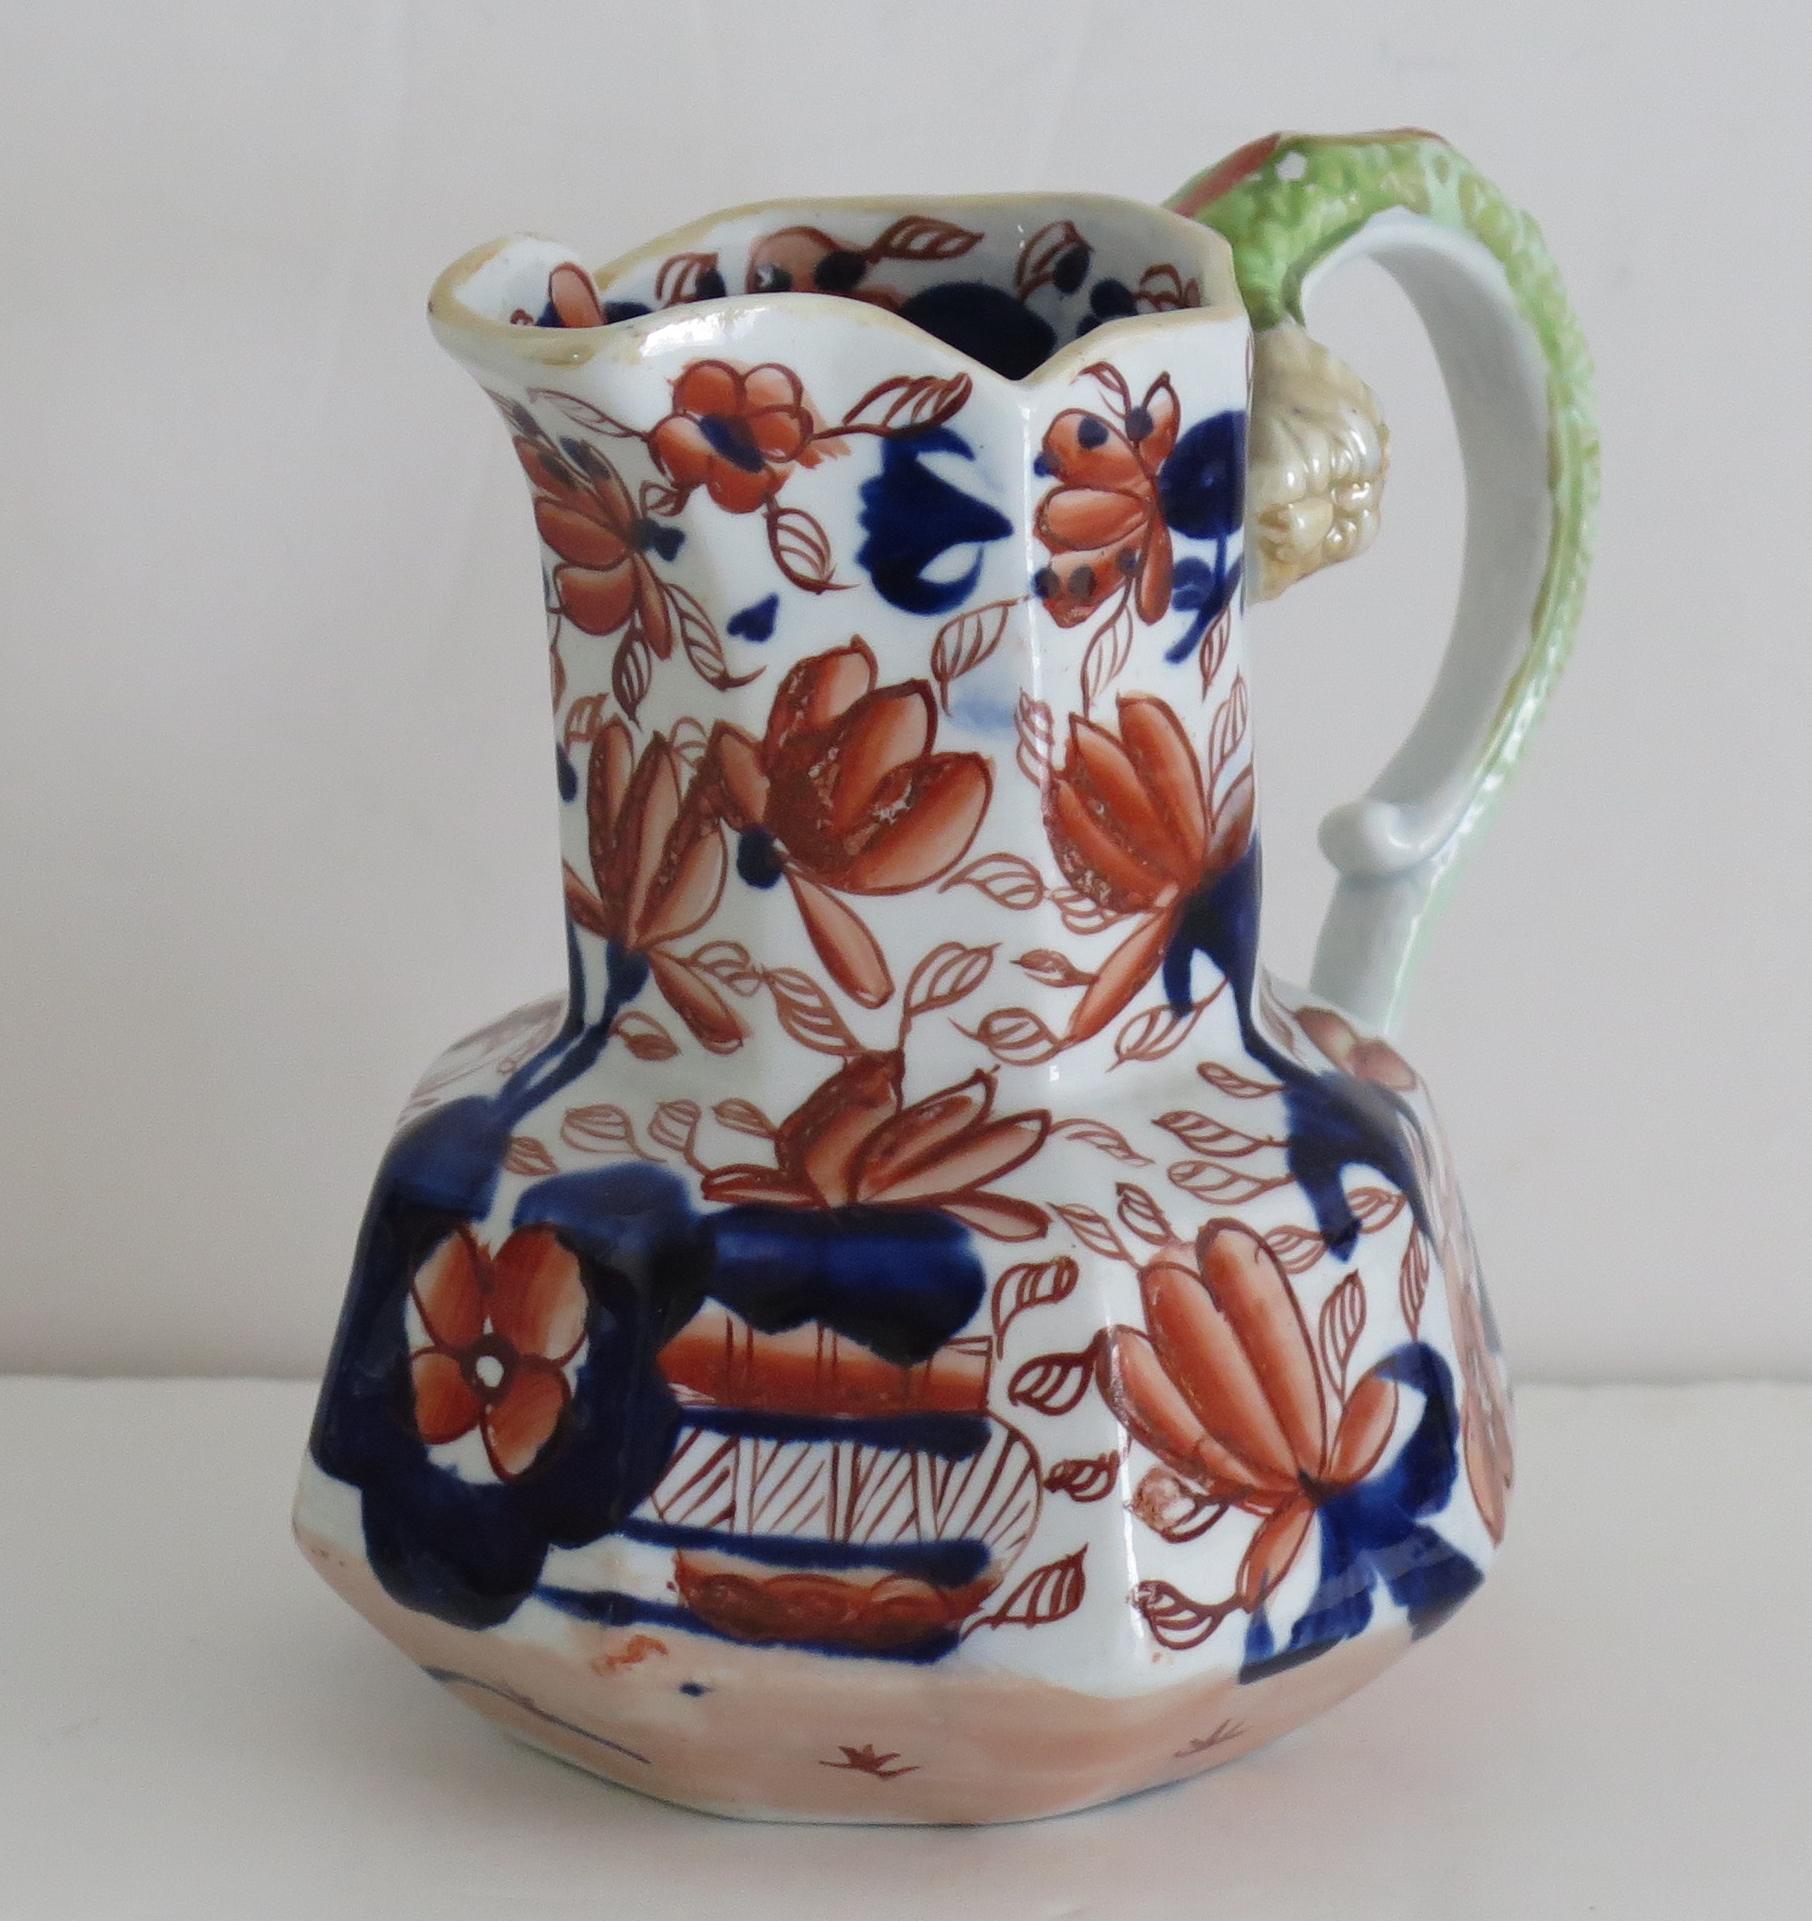 This is a good late Georgian ironstone Hyrda Jug or Pitcher in a Basket Japan pattern, by an English Staffordshire maker, Circa 1820.

The jug is well potted with an octagonal shape with a lovely high loop snake handle.

The Jug has a good